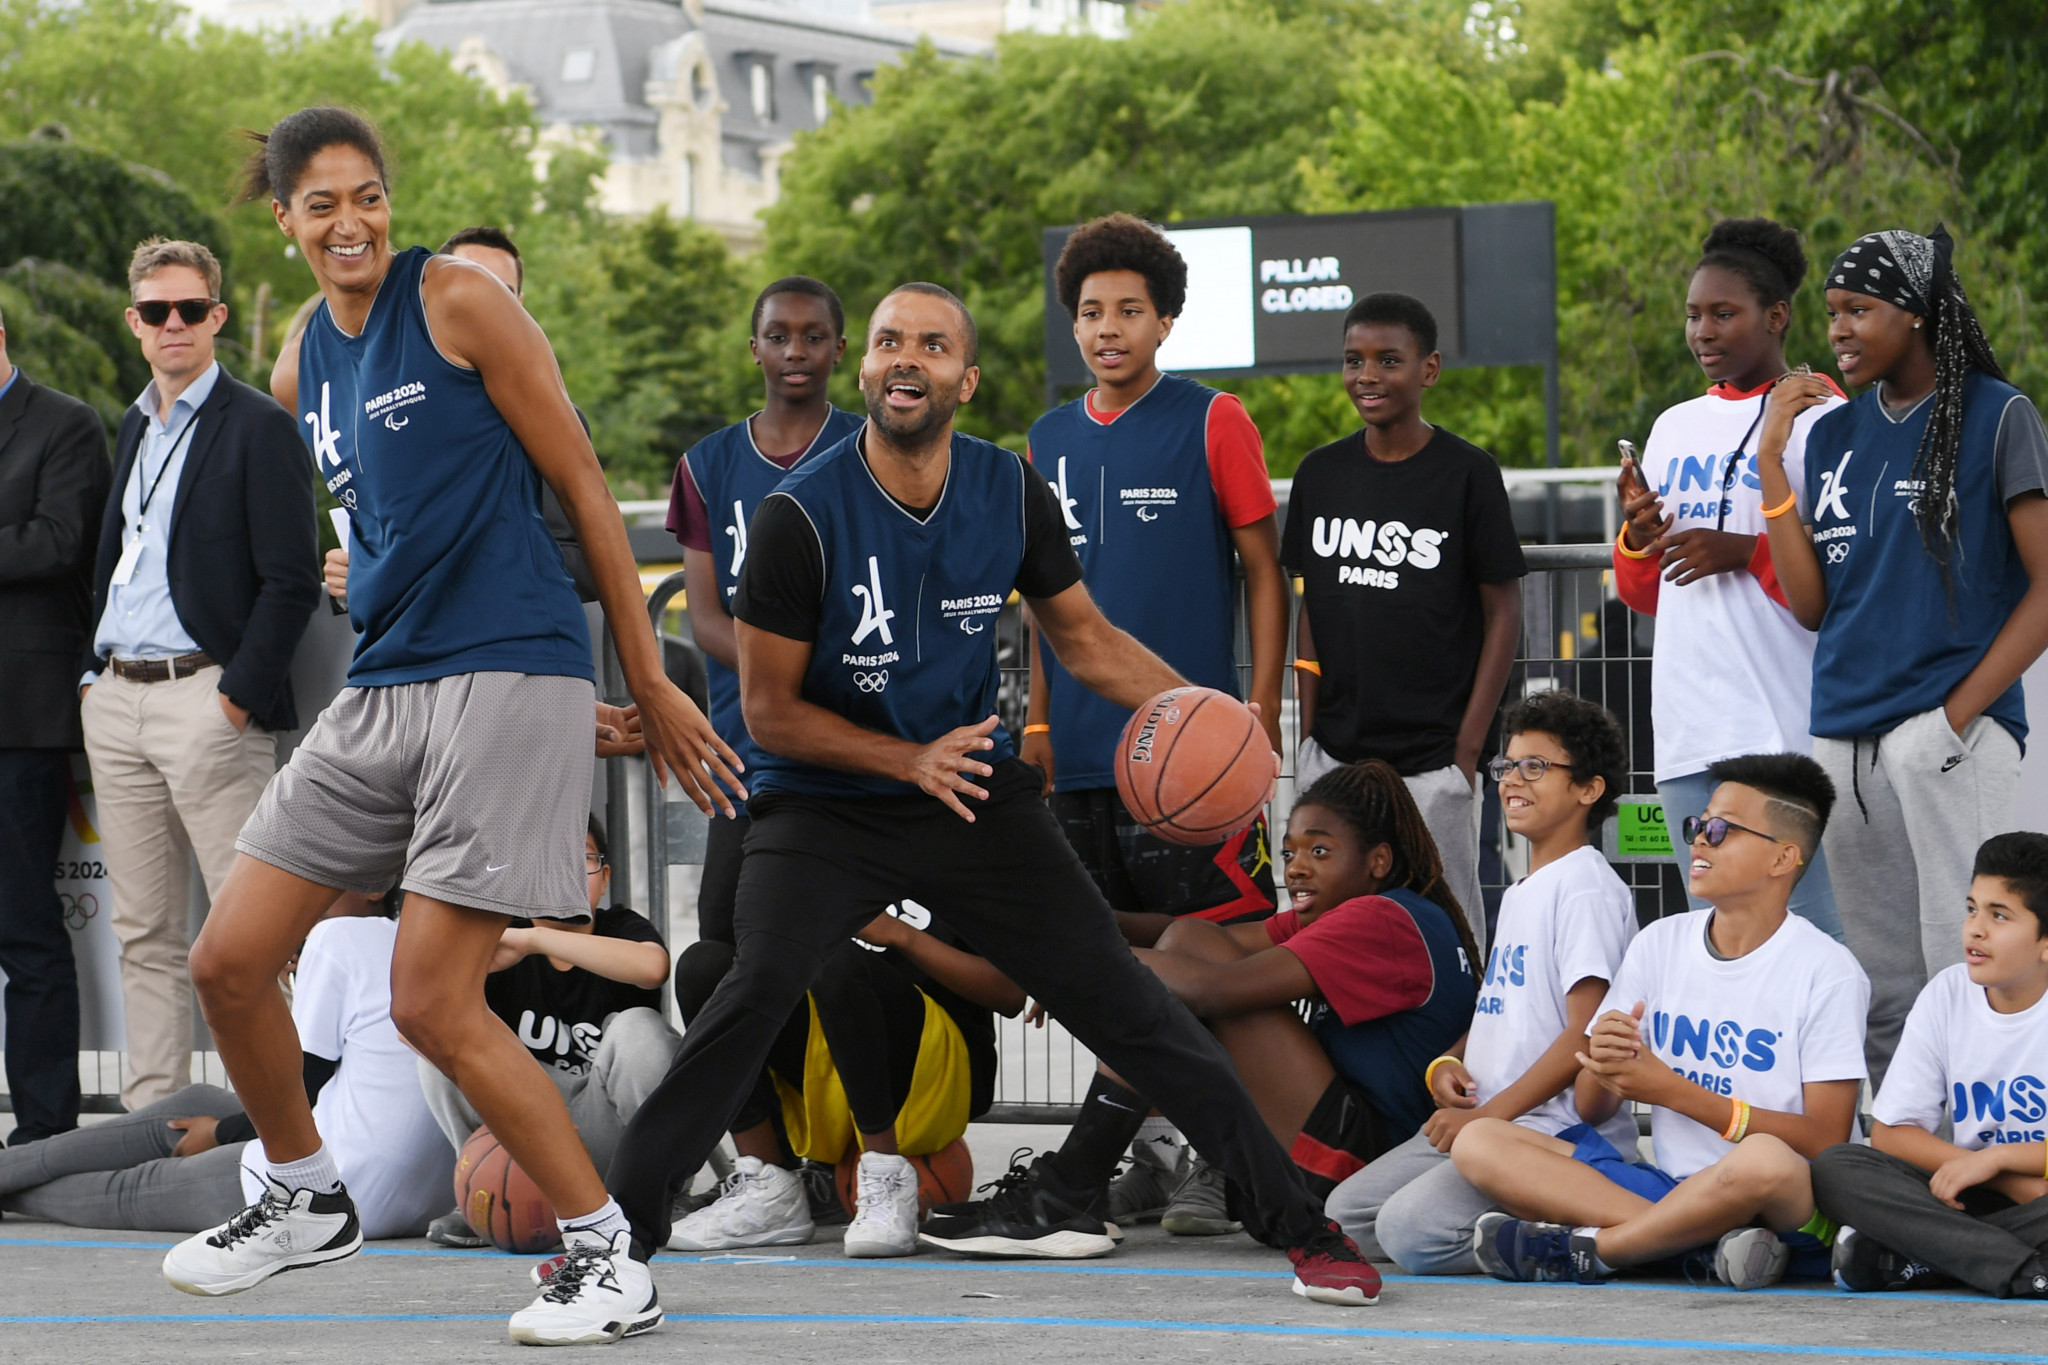 French basketball player Tony Parker, centre, says it is his "mission" to promote sport among young people ©Paris 2024